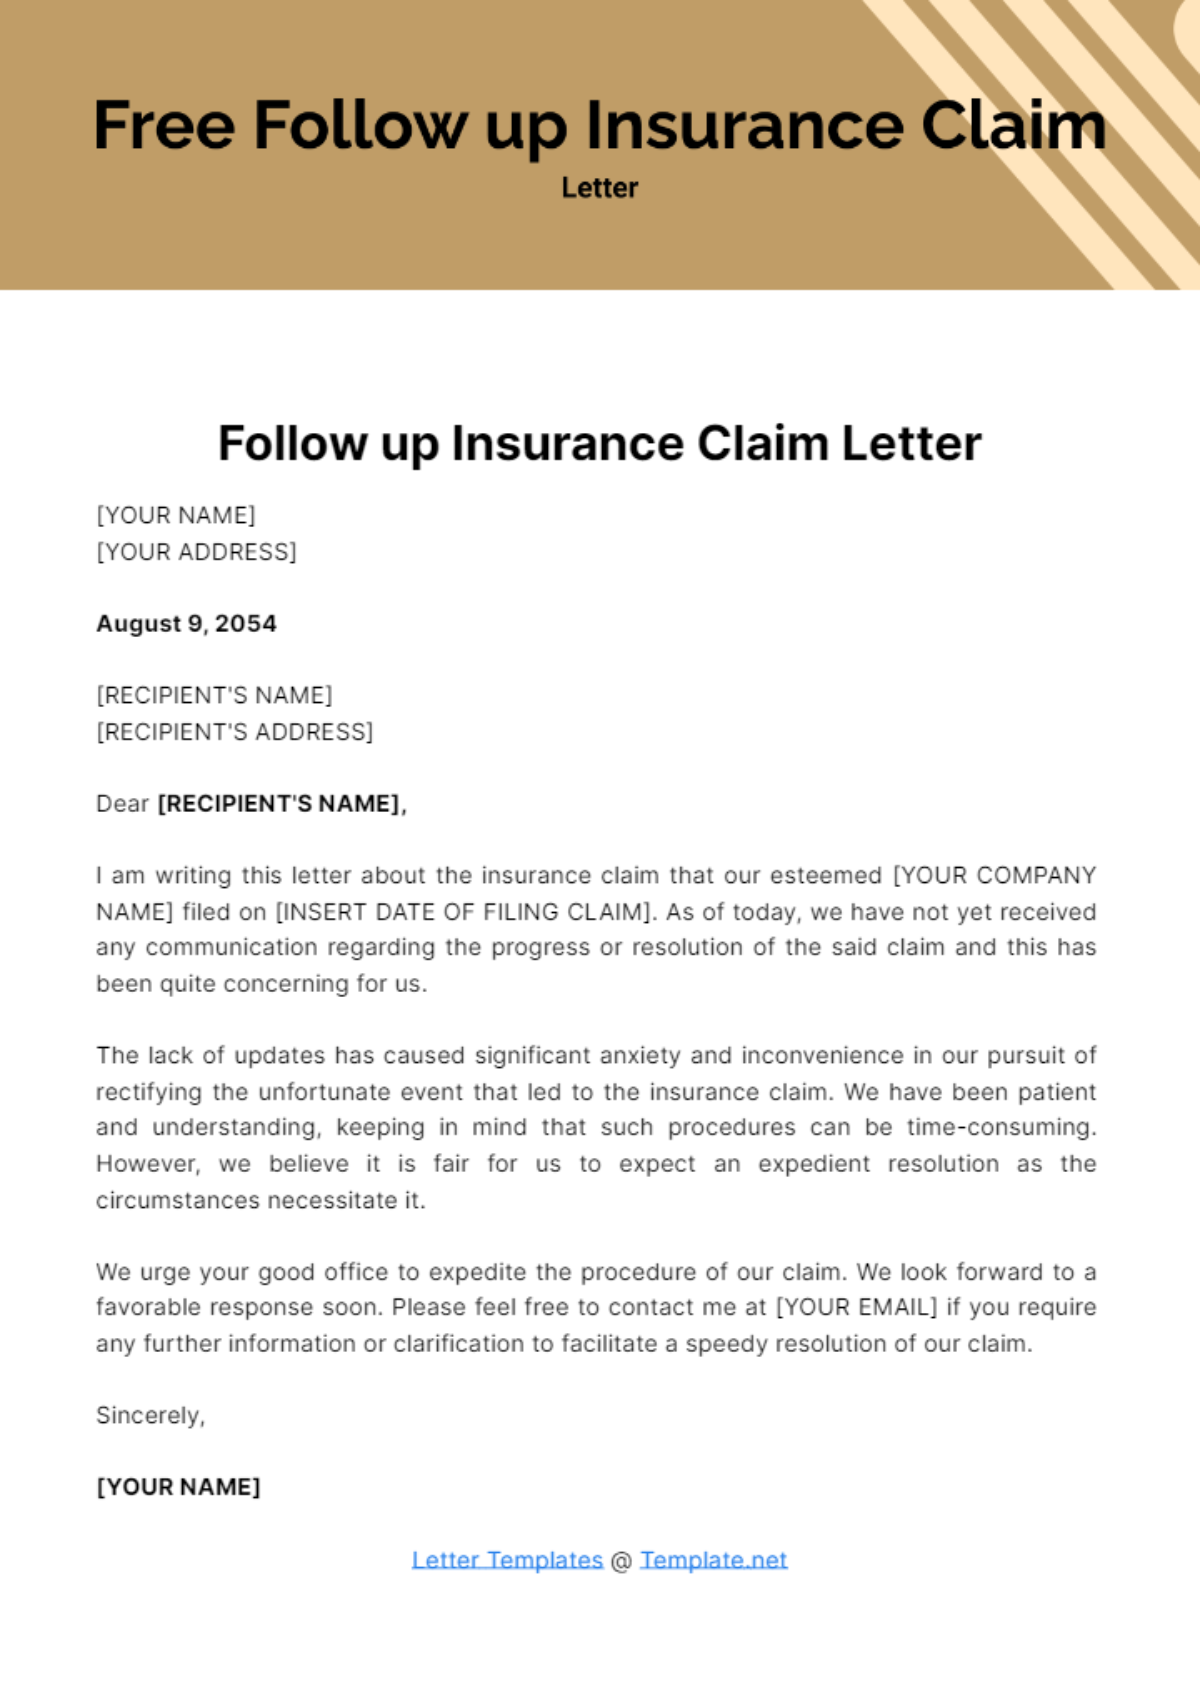 Free Follow up Insurance Claim Letter Template